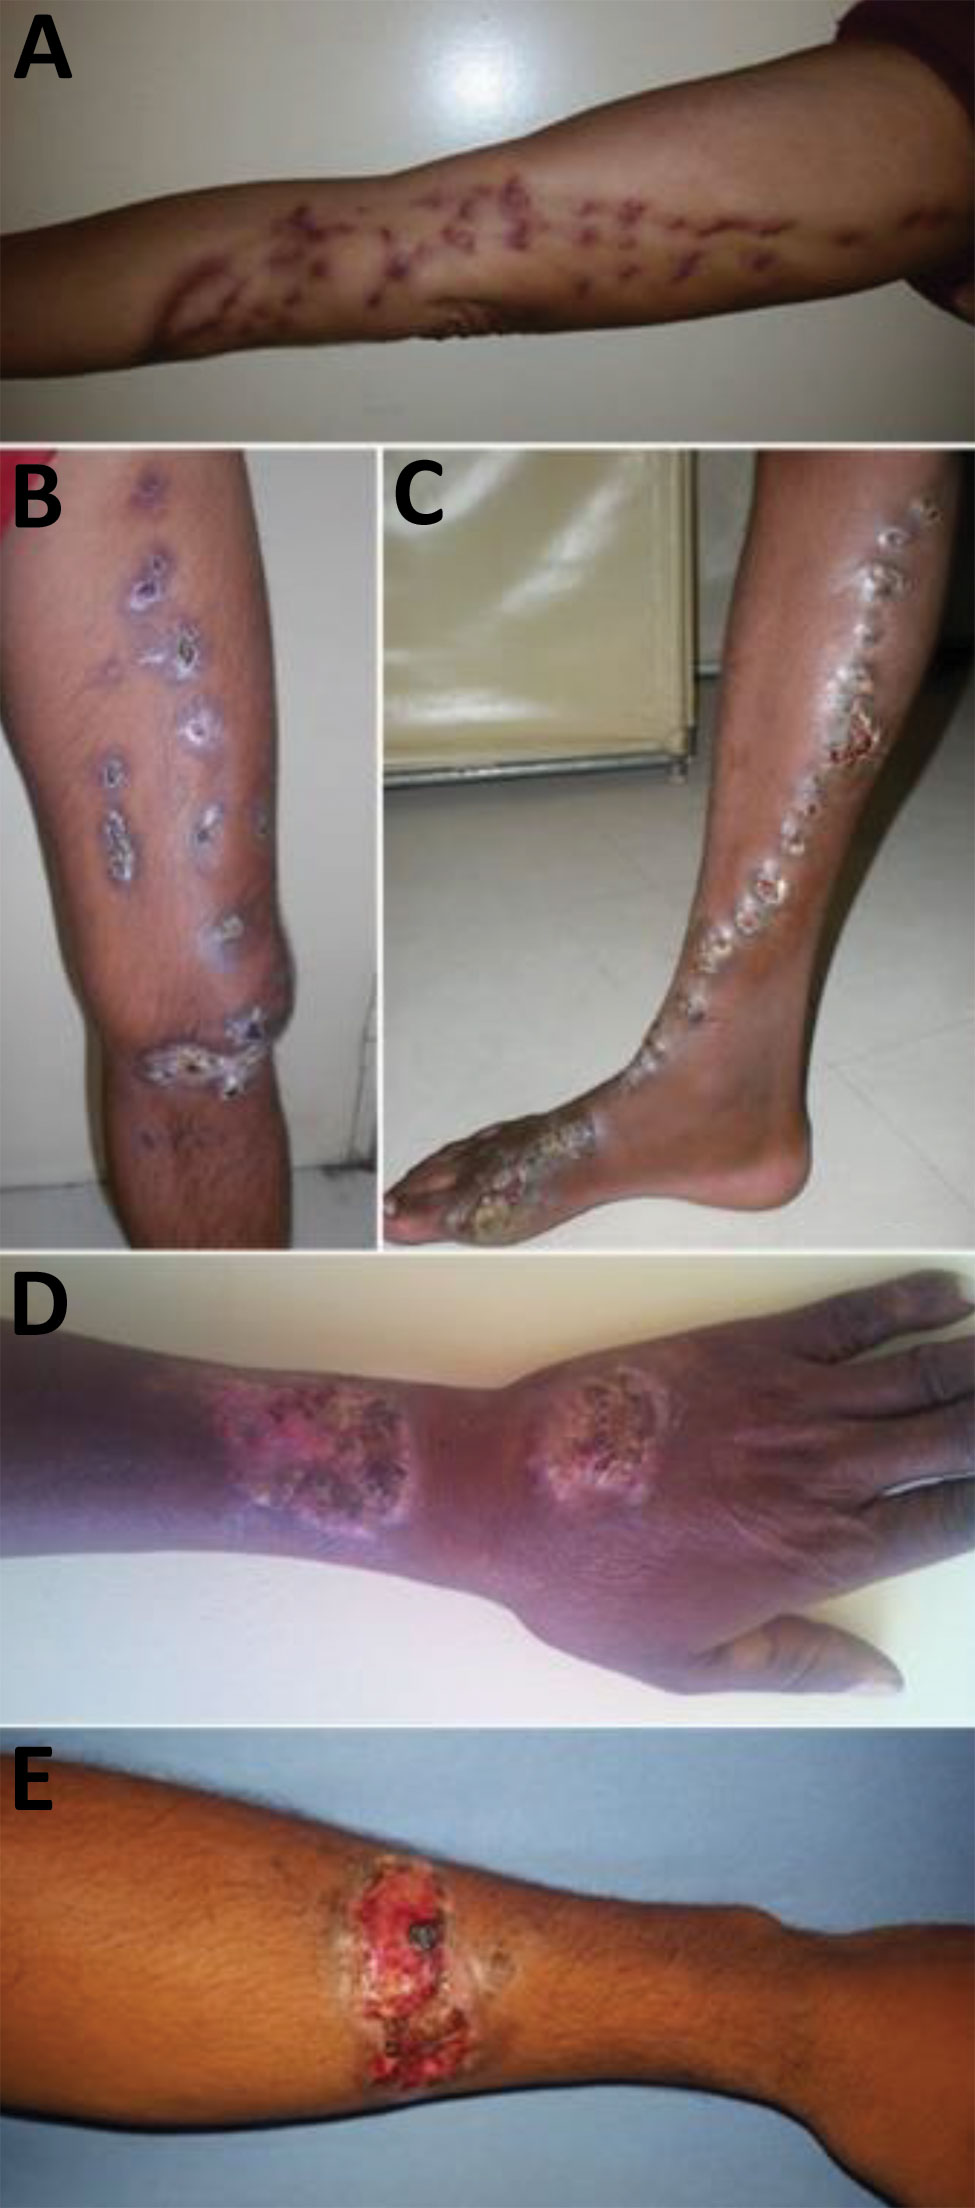 Clinical manifestations of sporotrichosis in patients with chronic cutaneous and subcutaneous lesions, Madagascar, March 2013–June 2017. A–C) Lymphocutaneous lesions. D) Lymphocutaneous ulcerative budding and crusty lesion. E) Ulceroerosive and erythematosus lesion with irregular border, easily misdiagnosed as chromoblastomycosis.